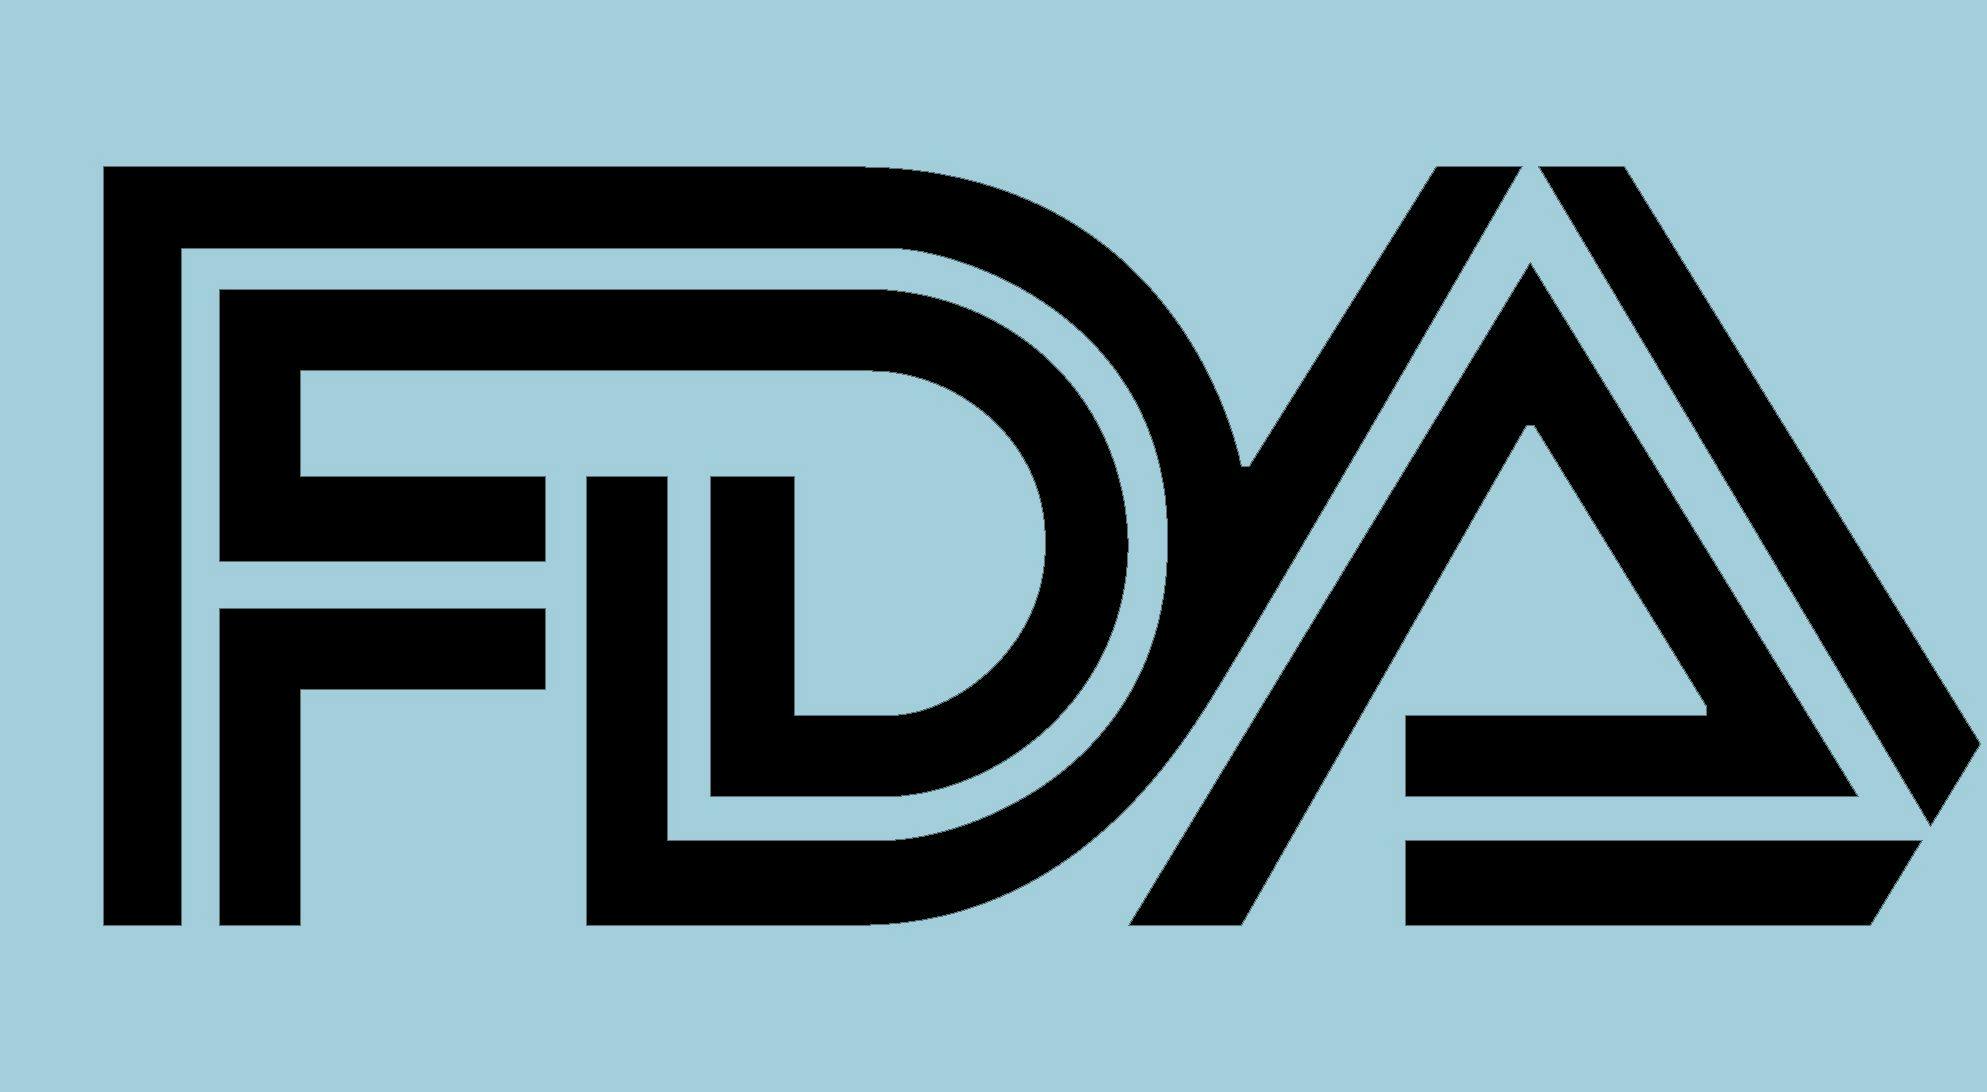 FDA Permits the Study of a Novel Cancer Drug for Multiple Solid Tumors to Continue